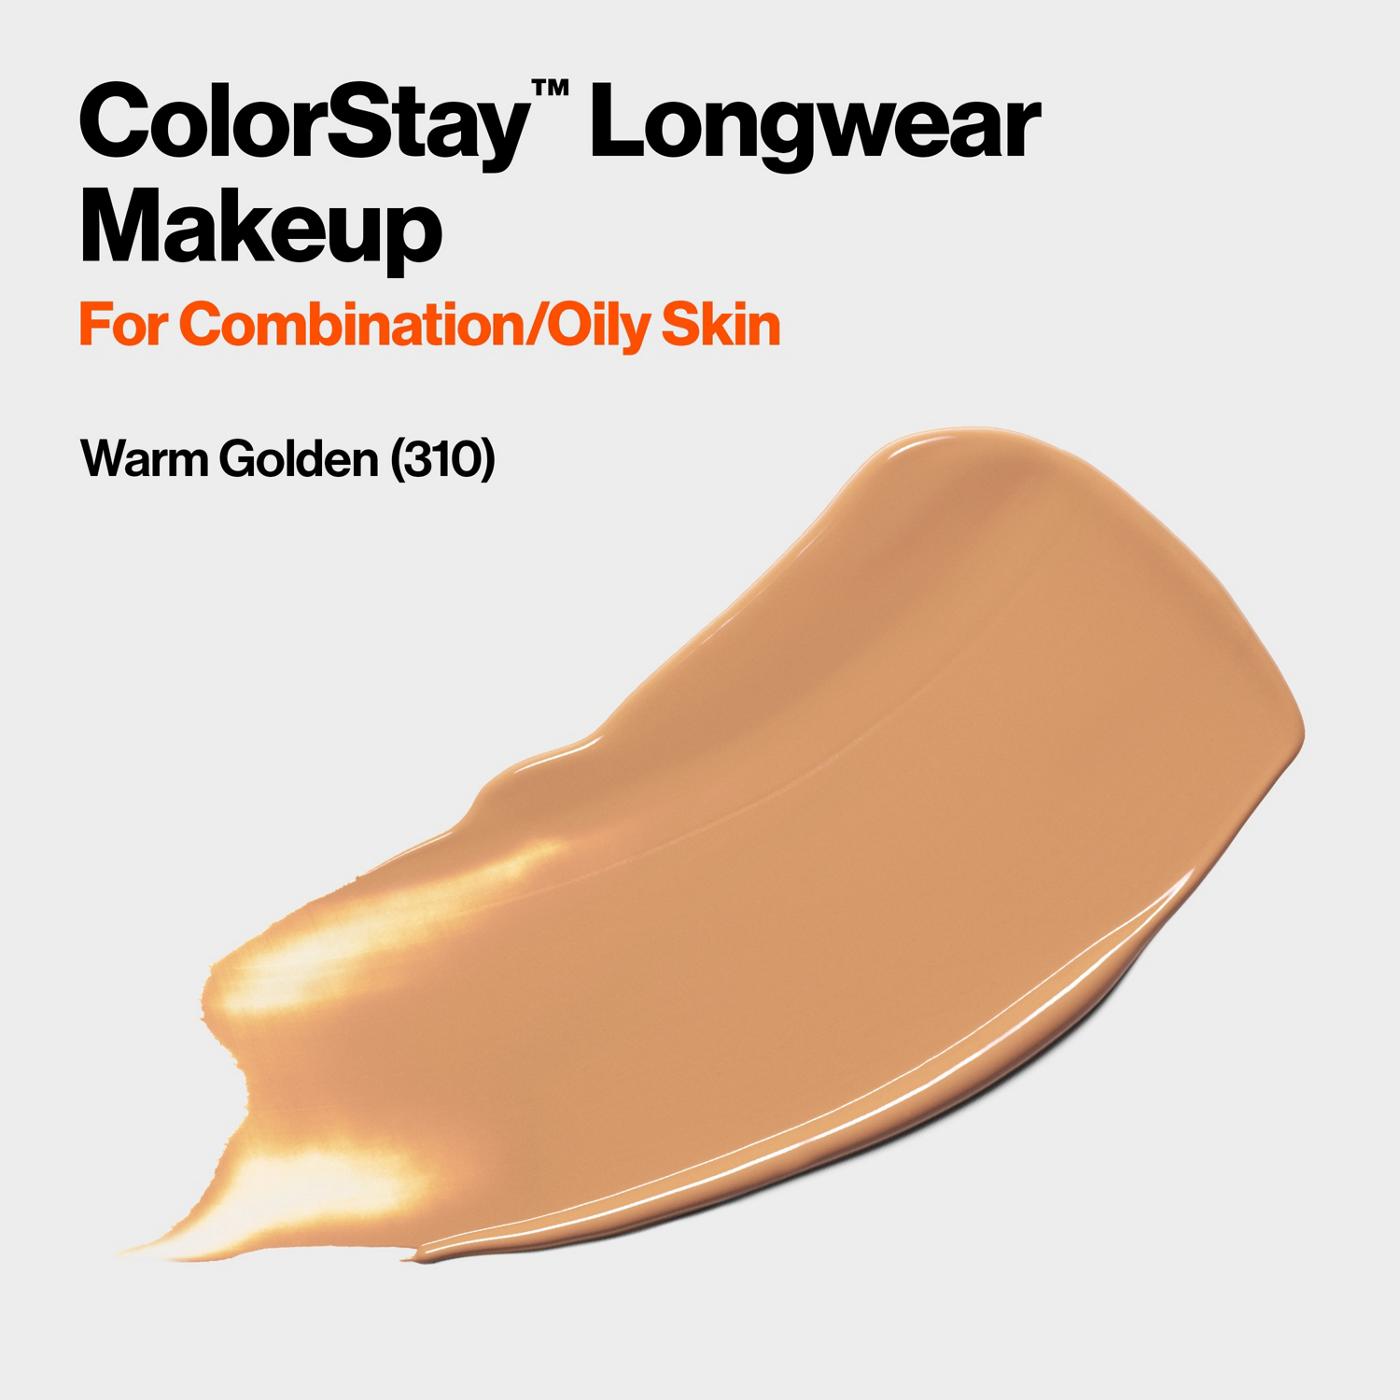 Revlon ColorStay Foundation for Combination/Oily Skin, 310 Warm Golden; image 6 of 6